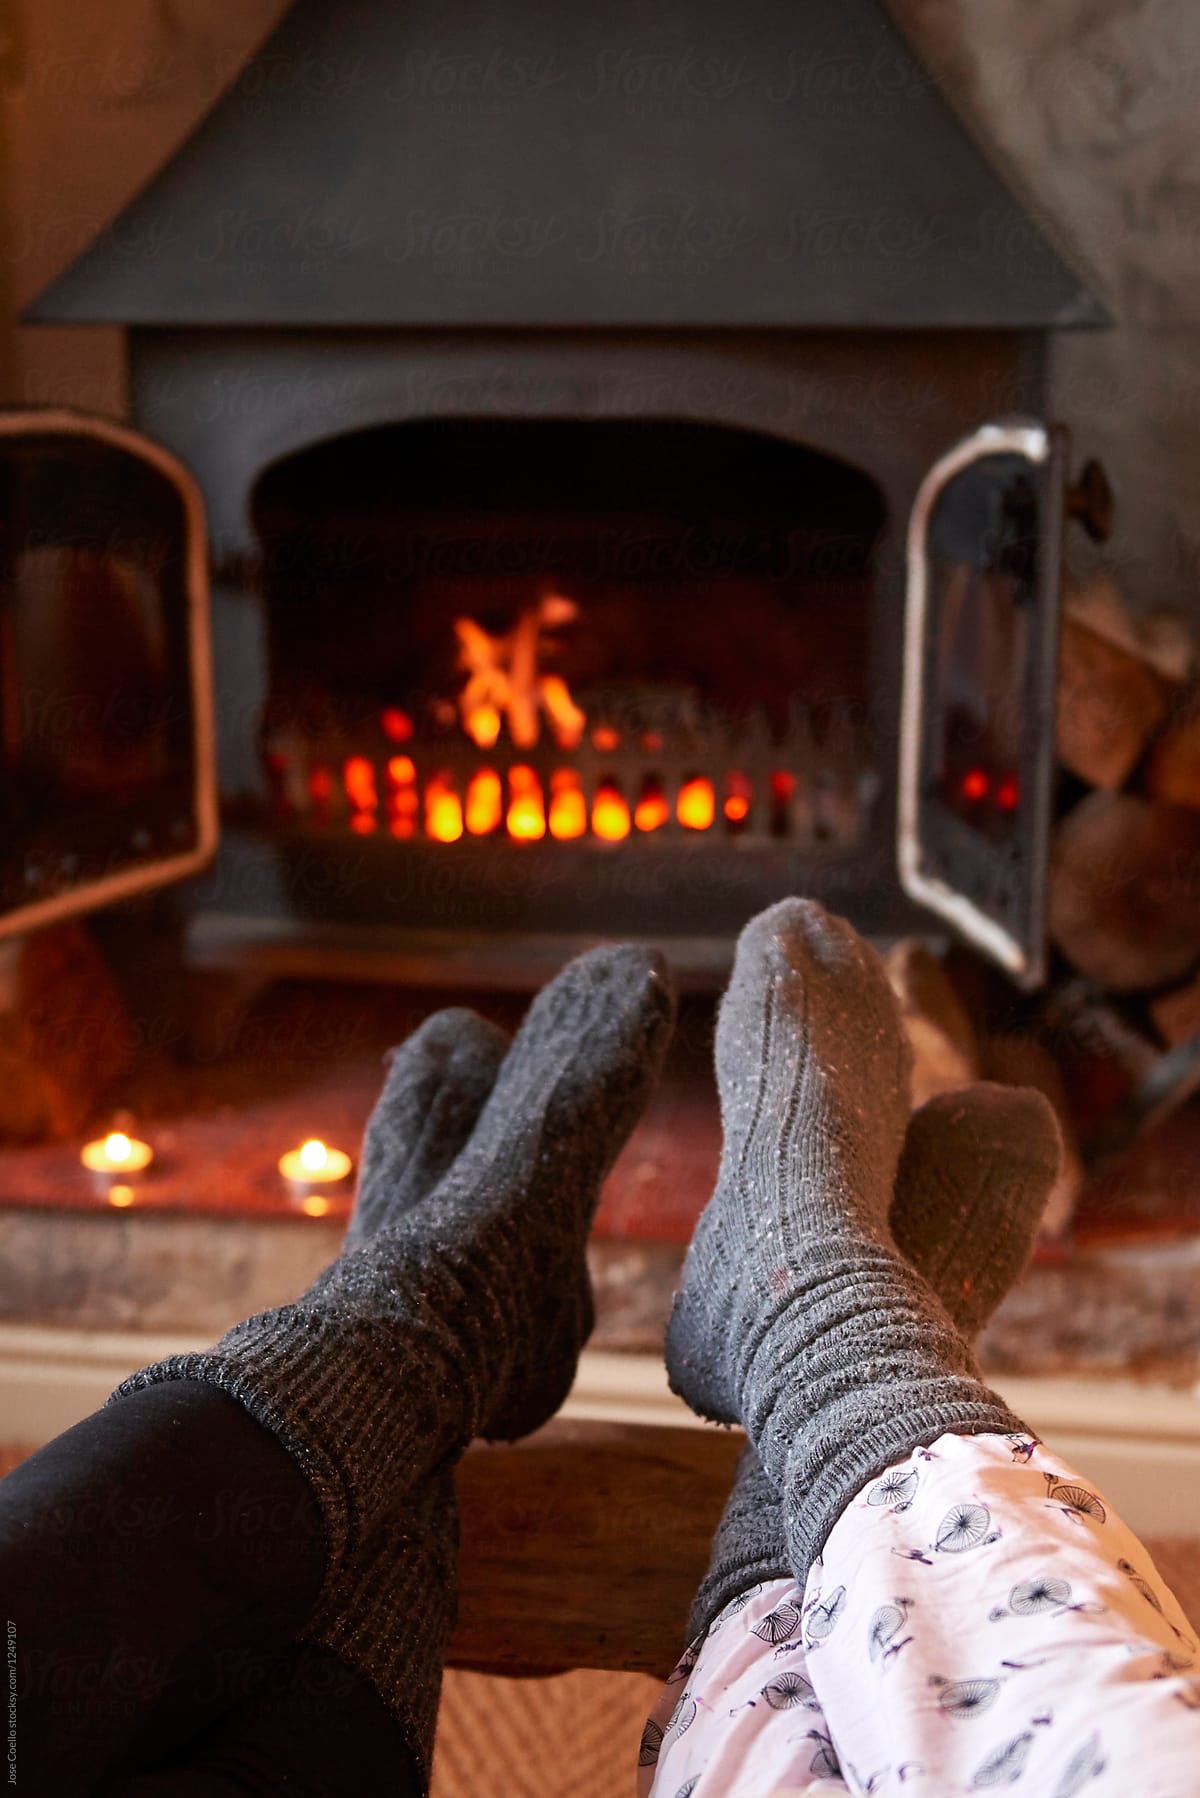 Feet by the fire.